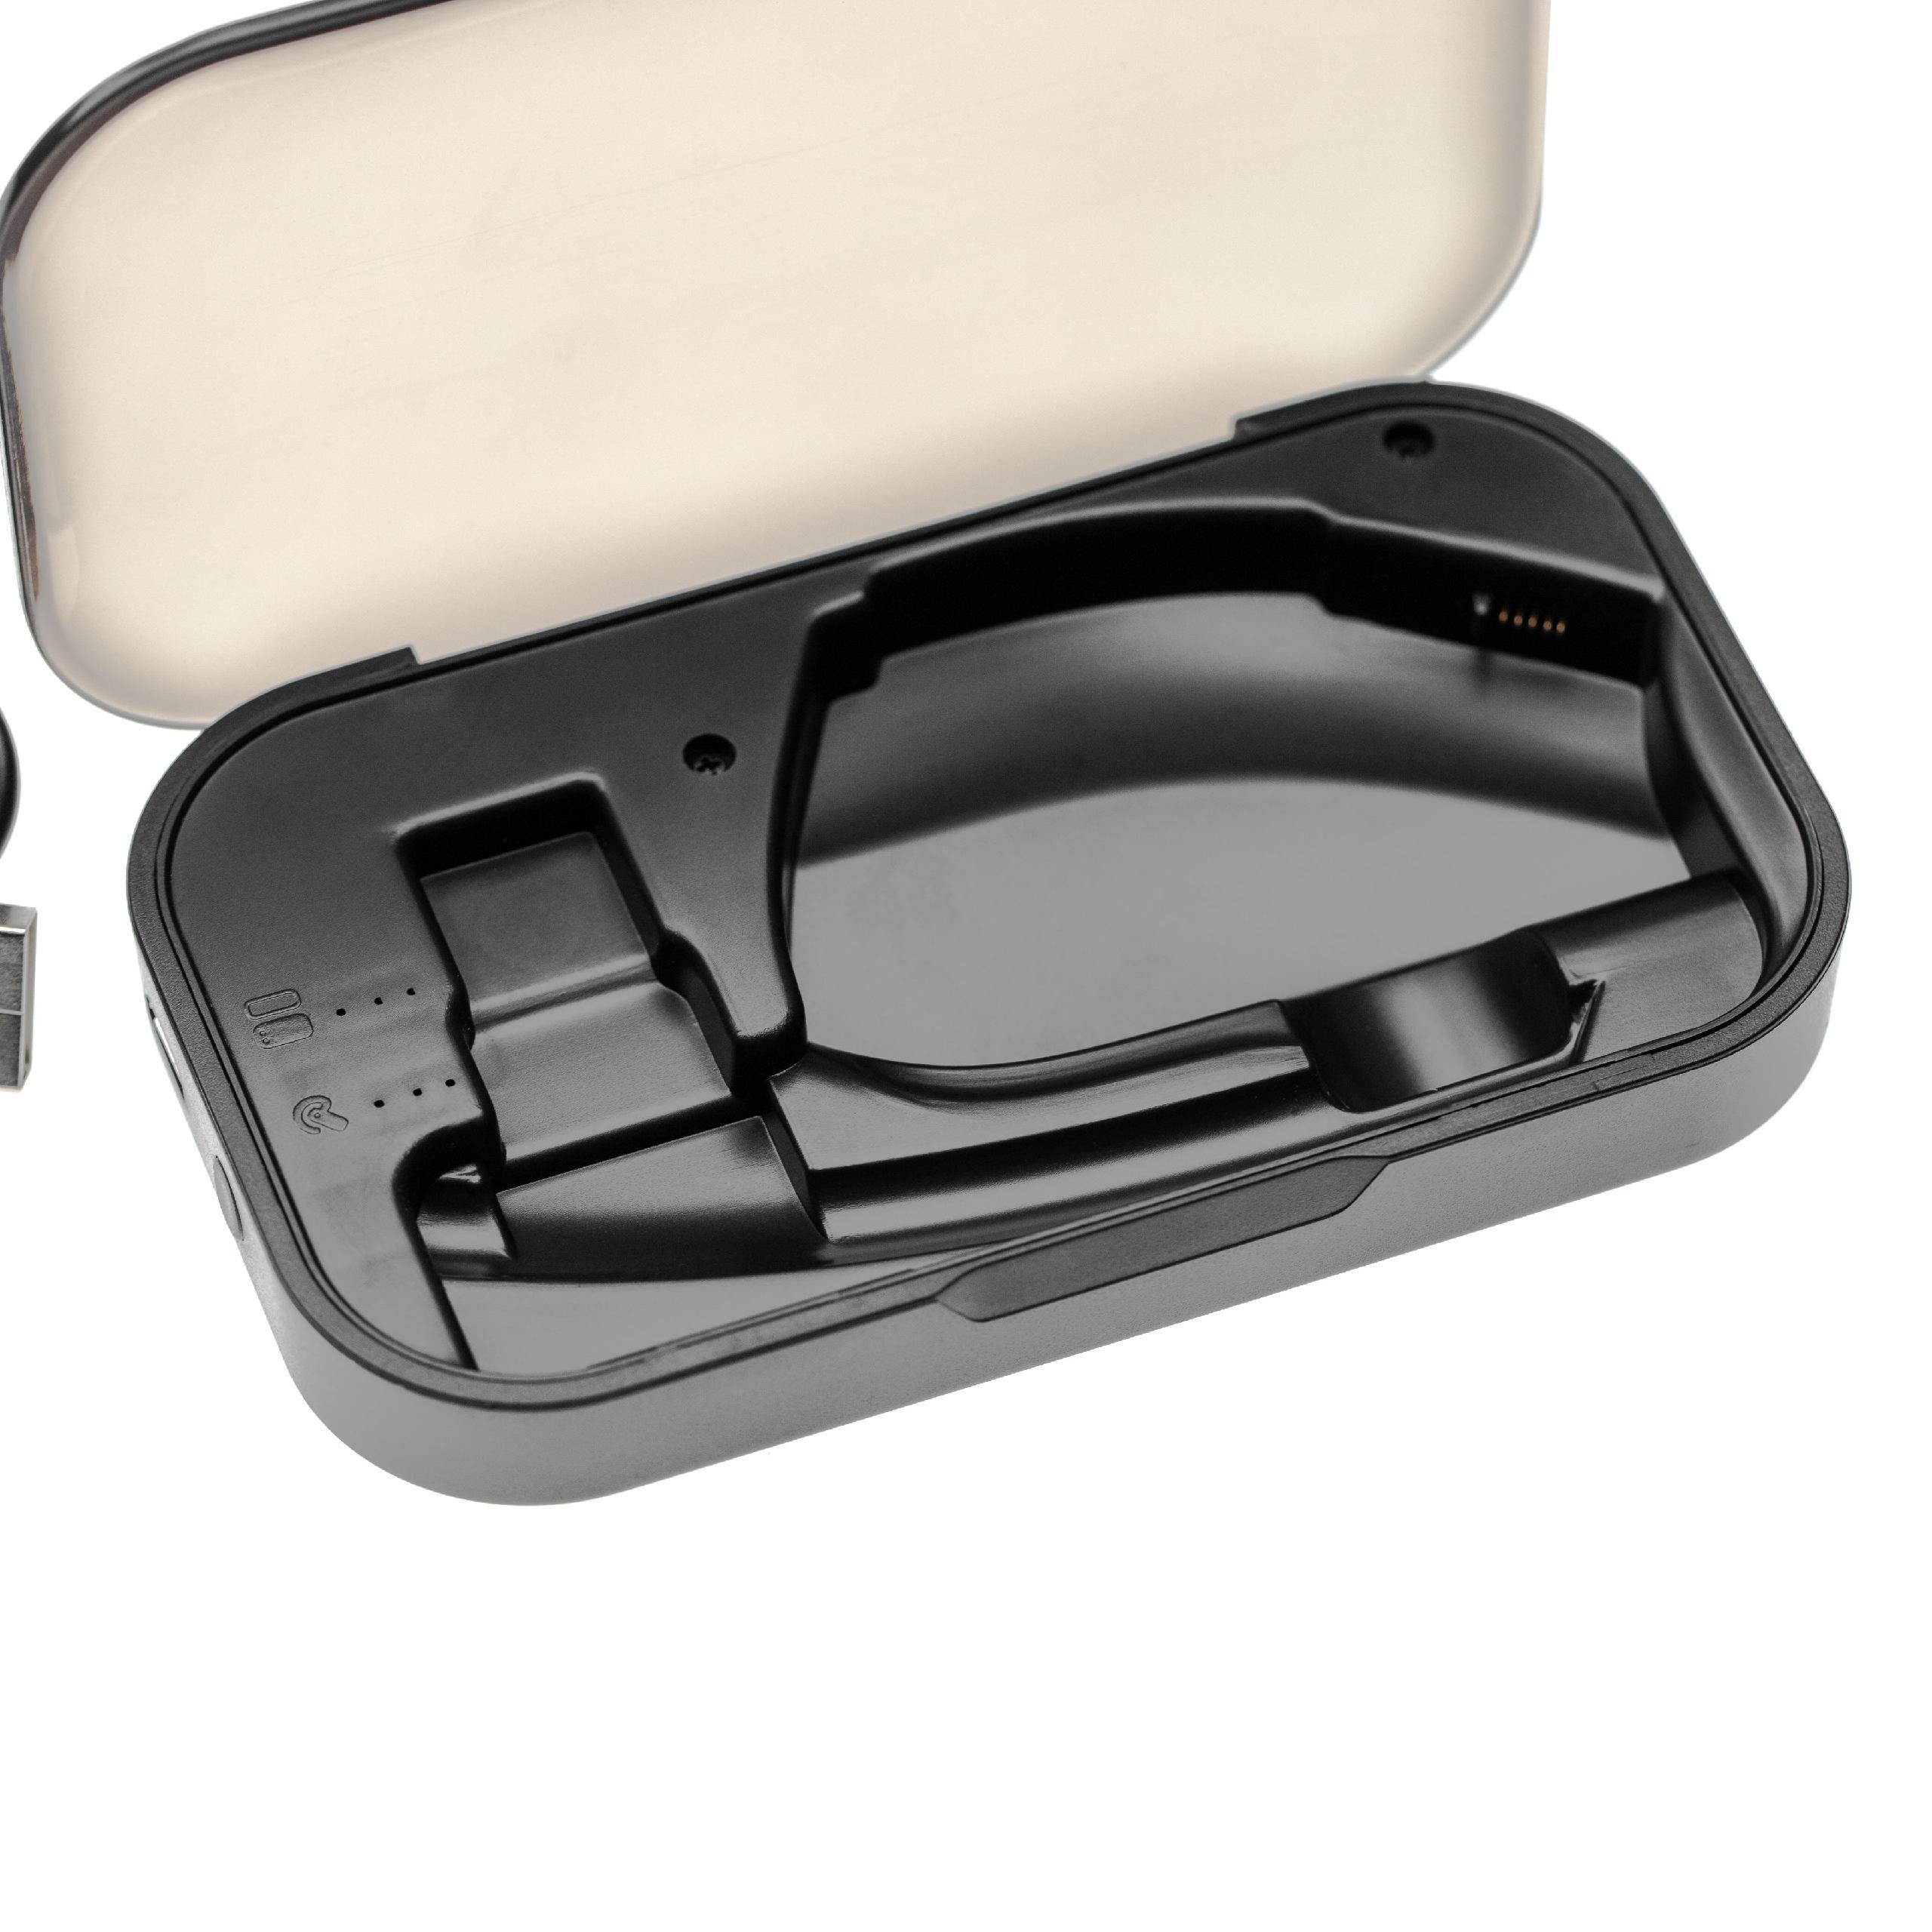 Charging Box suitable for Plantronics Voyager Legend UC Headset - Incl. USB Charger Cable Black